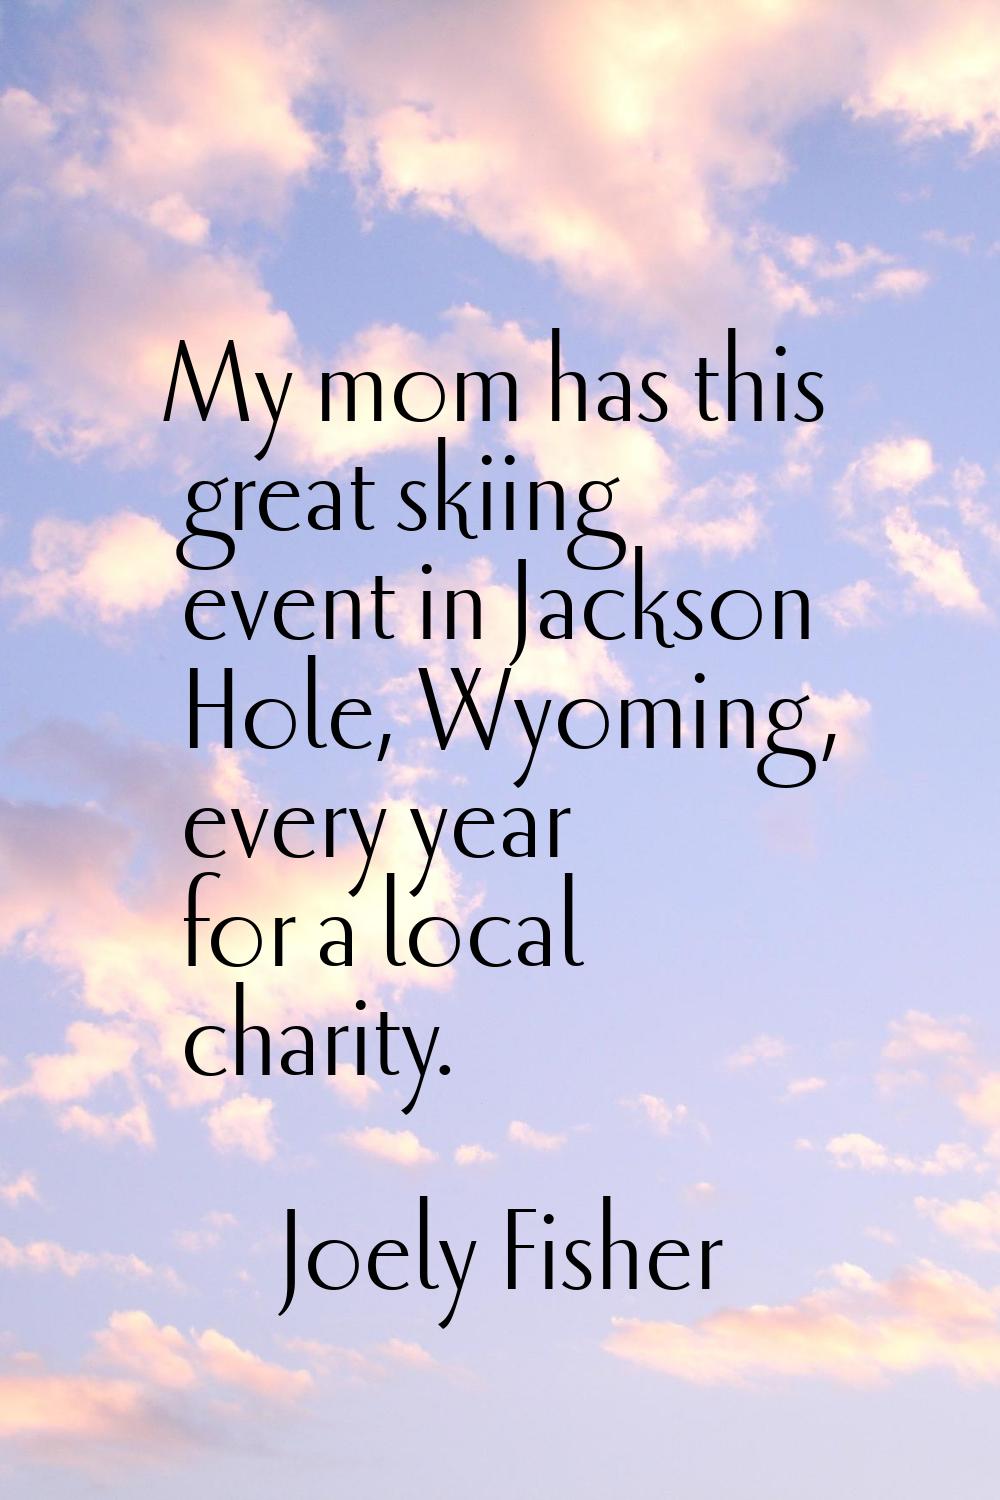 My mom has this great skiing event in Jackson Hole, Wyoming, every year for a local charity.